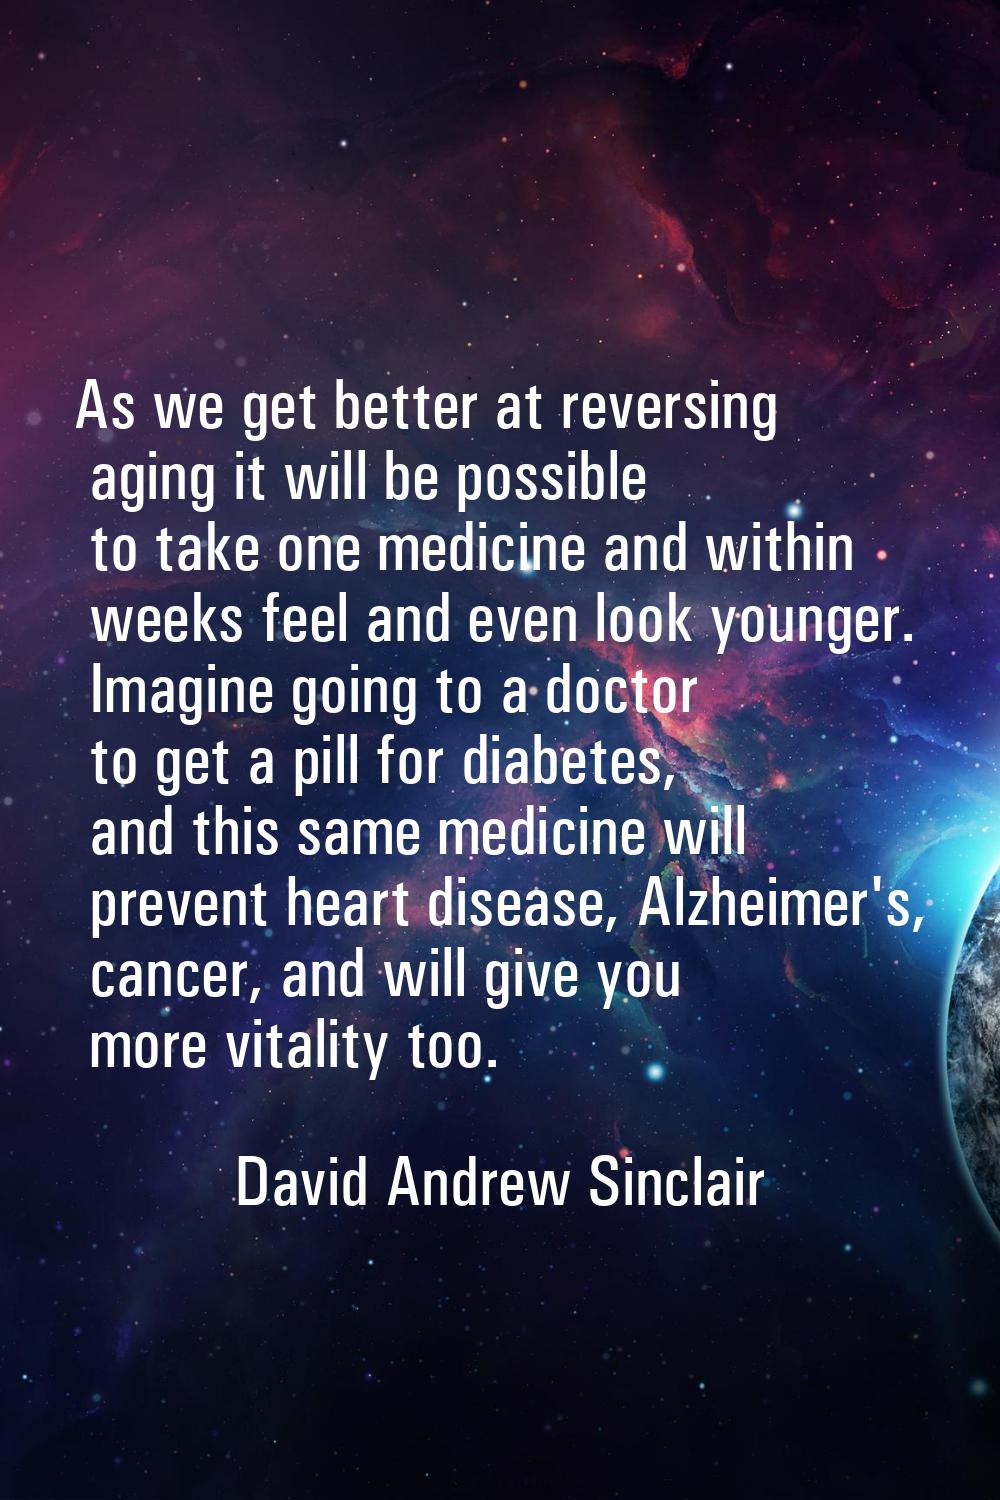 As we get better at reversing aging it will be possible to take one medicine and within weeks feel 